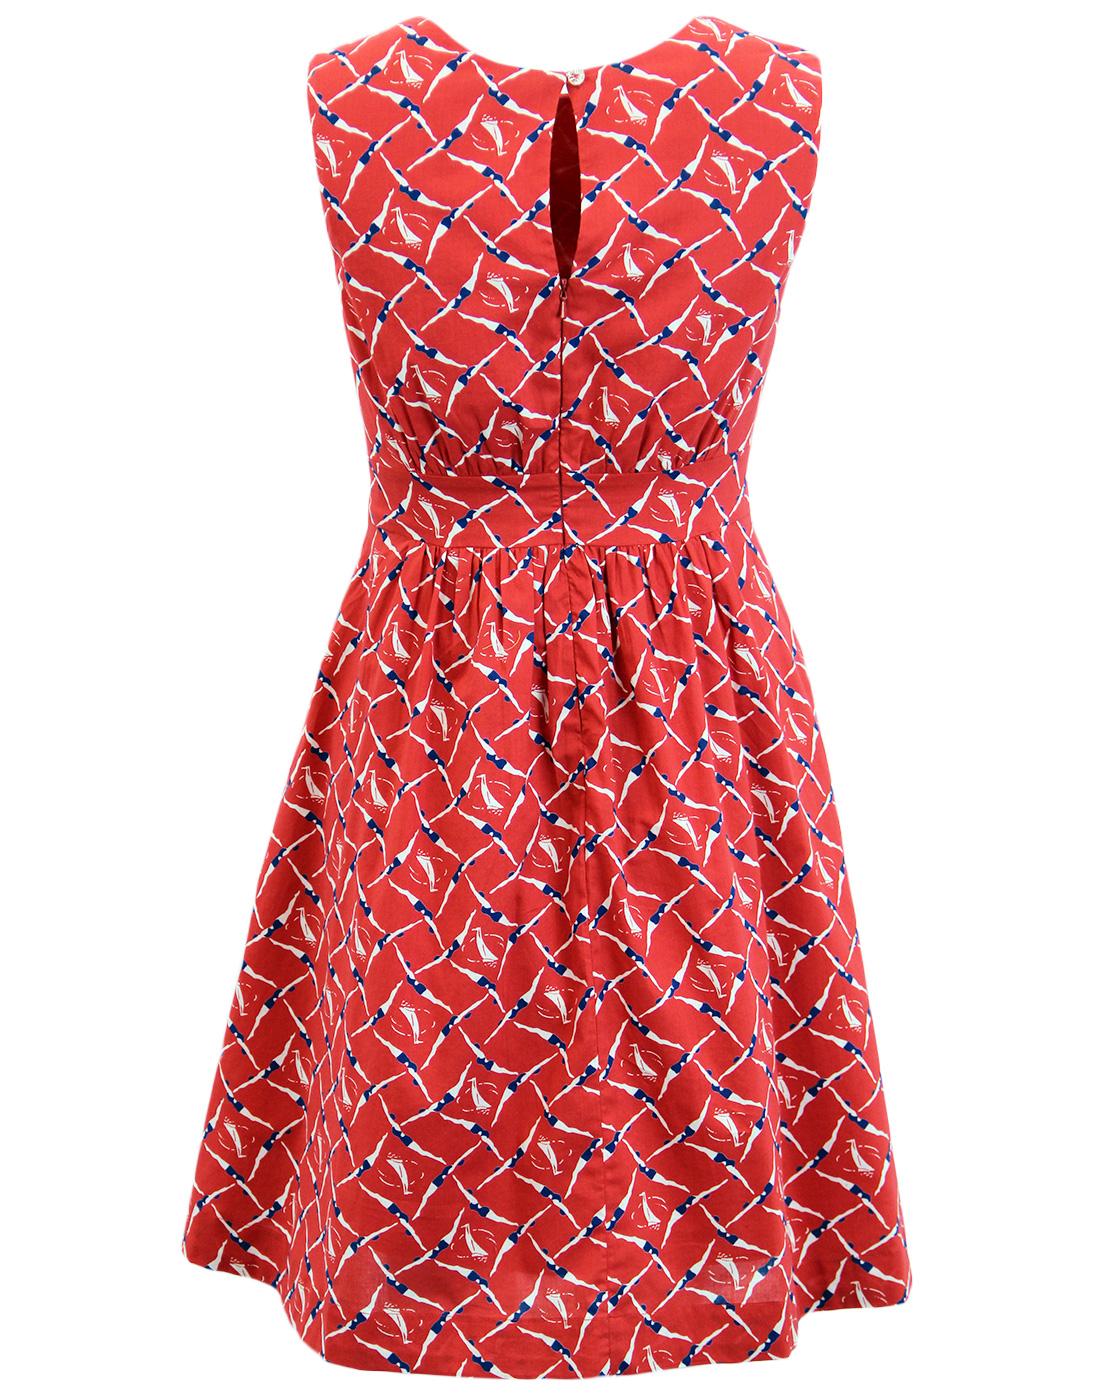 EMILY AND FIN Lucy Retro Vintage Sleeveless Dress in Red